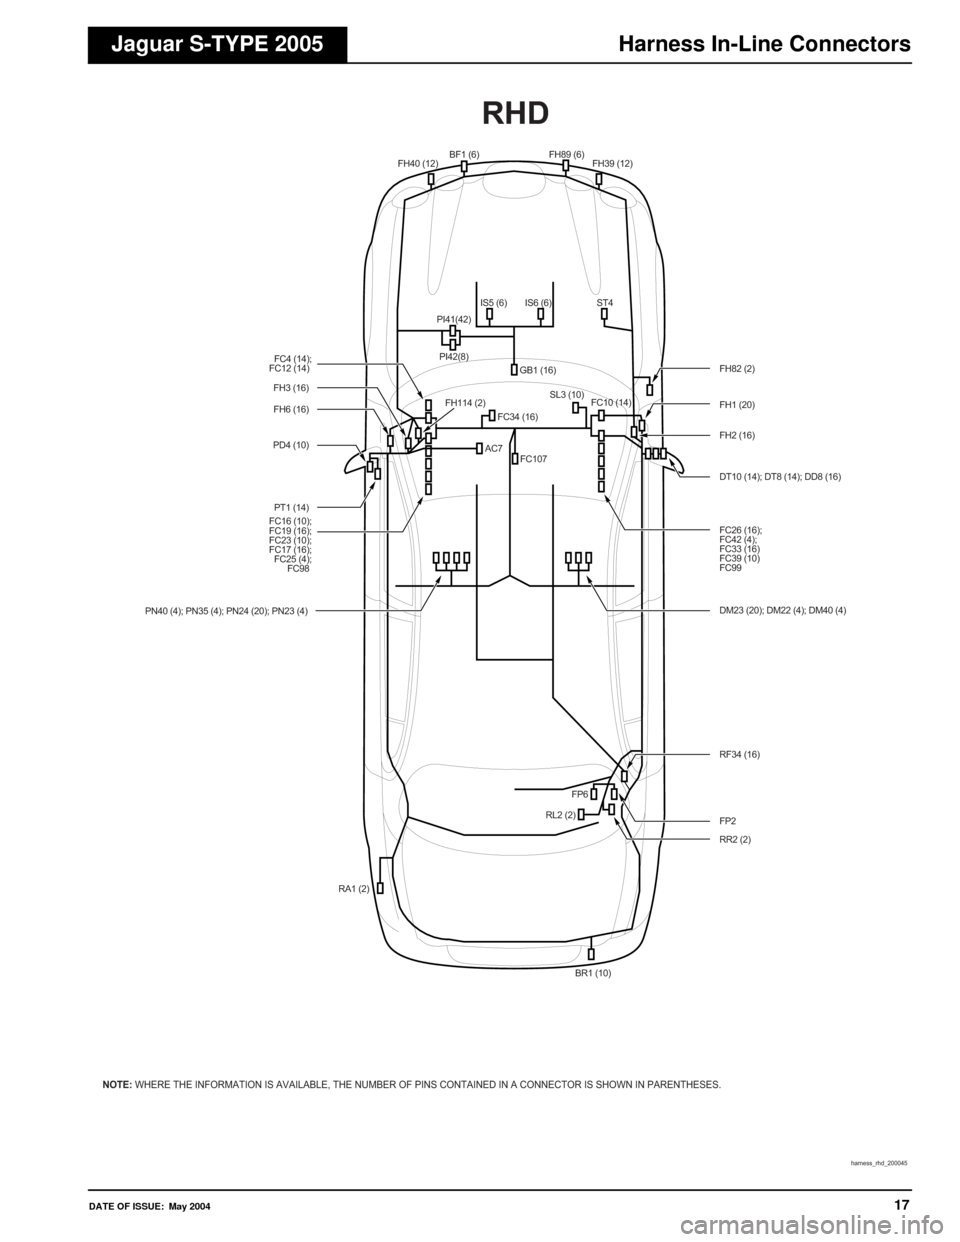 JAGUAR S TYPE 2005 1.G Electrical Manual 
DATE OF ISSUE: May 200417
Harness In-Line ConnectorsJaguar S-TYPE 2005
FC4 (14);
FC12 (14)
FC19 (16); FC16 (10);
FC23 (10);
FC17 (16); FC25 (4);
FC98
FH3 (16)
FH114 (2)
FH6 (16)
PD4 (10)
PT1 (14)
PN4